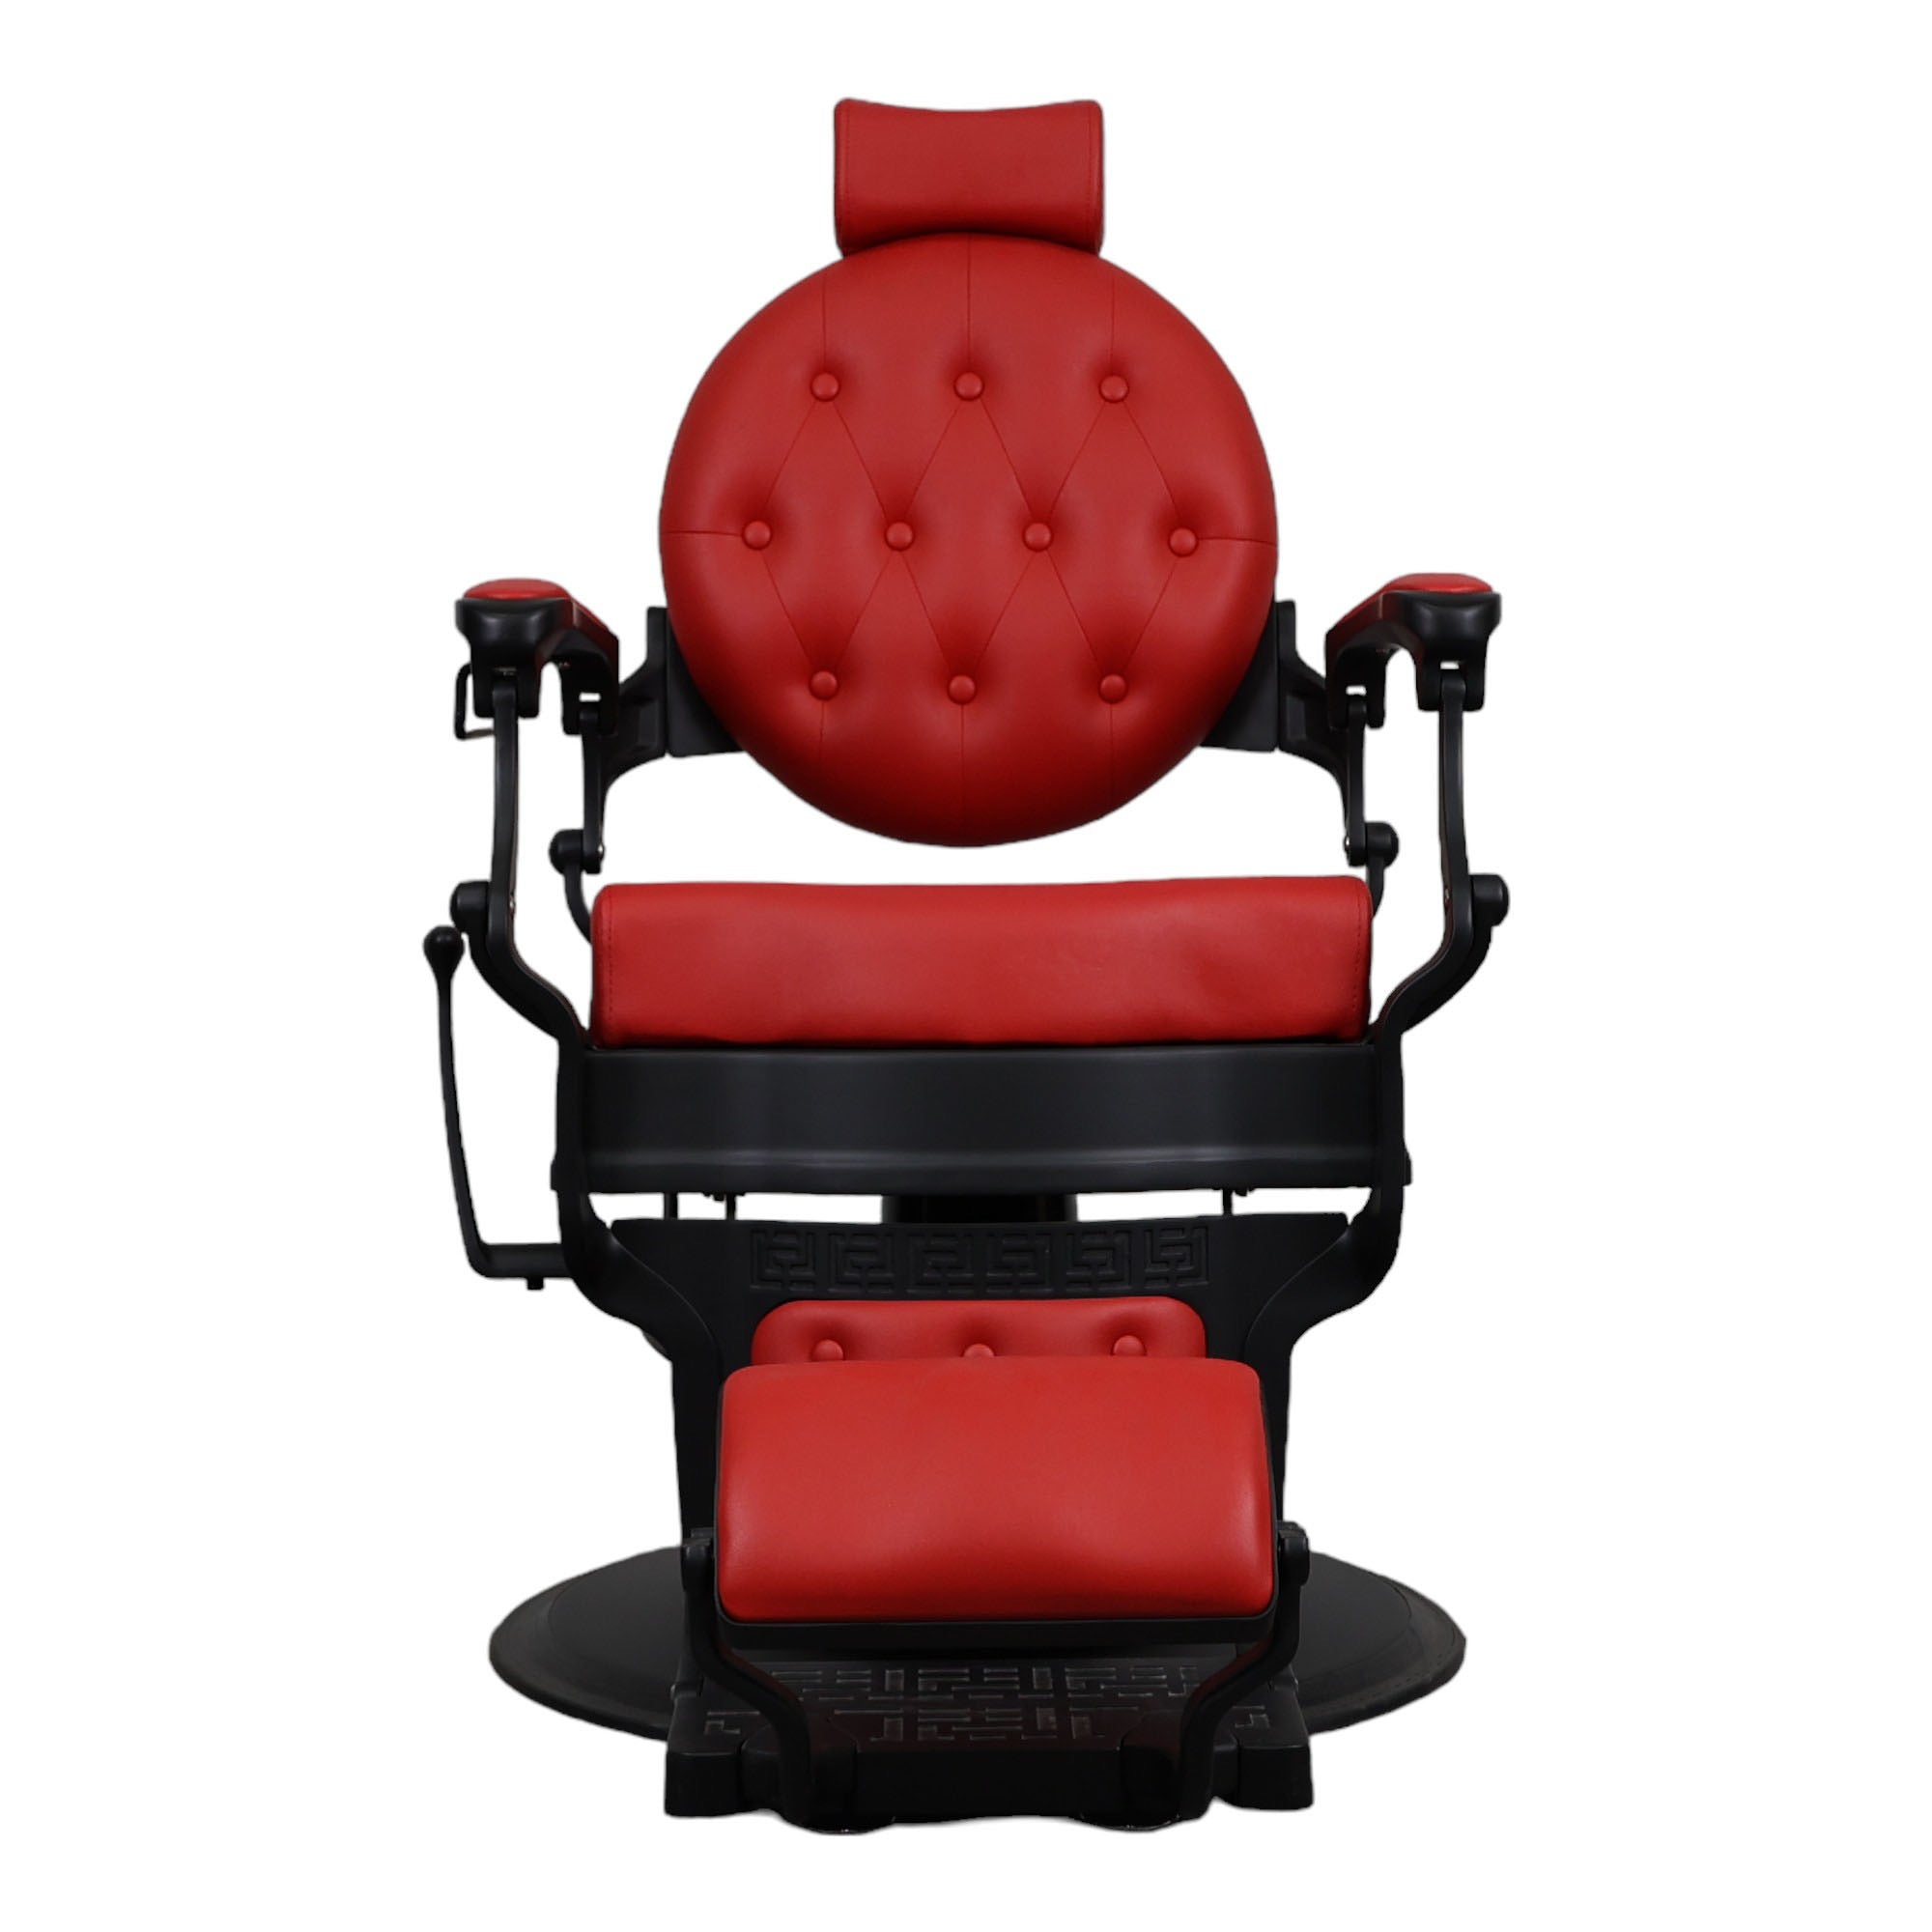 Barber Chair - Vintage Style Red Leather with Black Accents